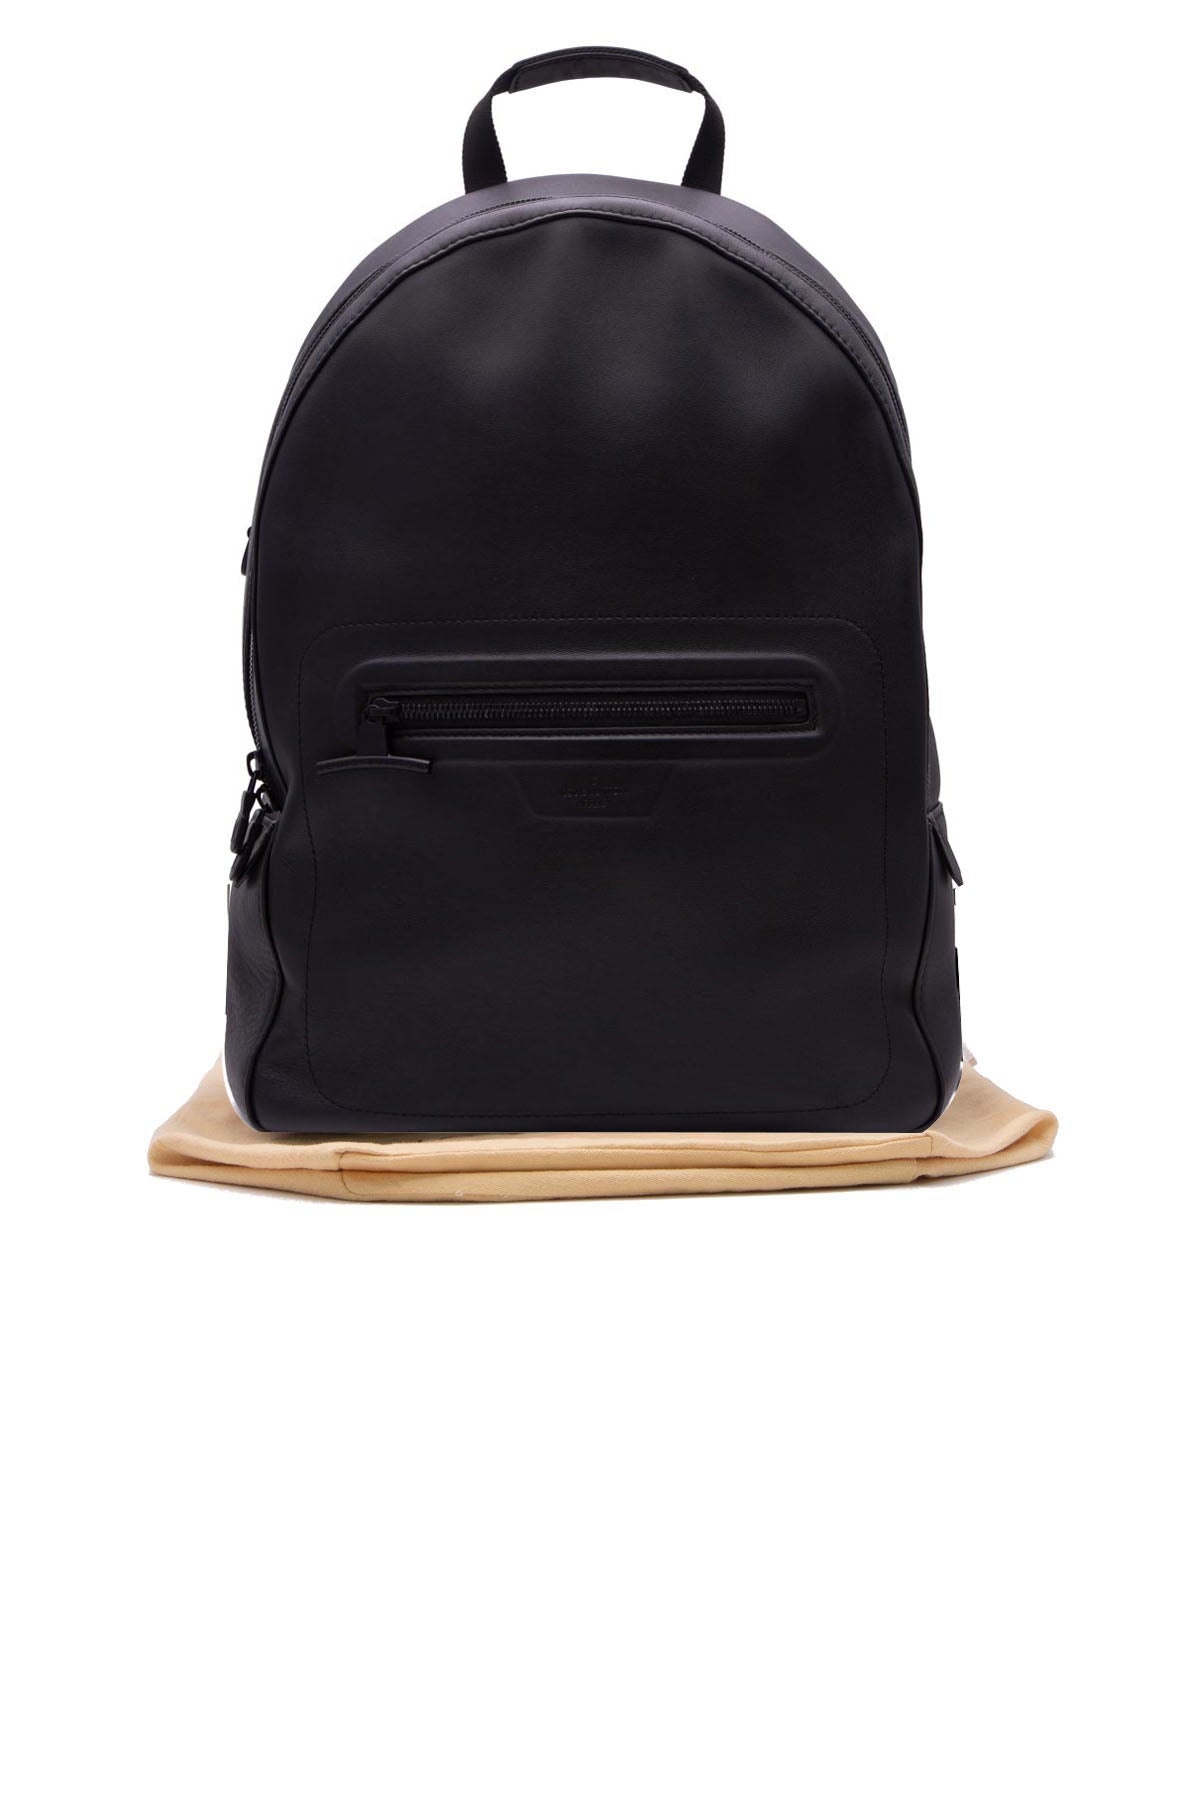 Louis Vuitton Dark Inifinity Backpack - Couture USA